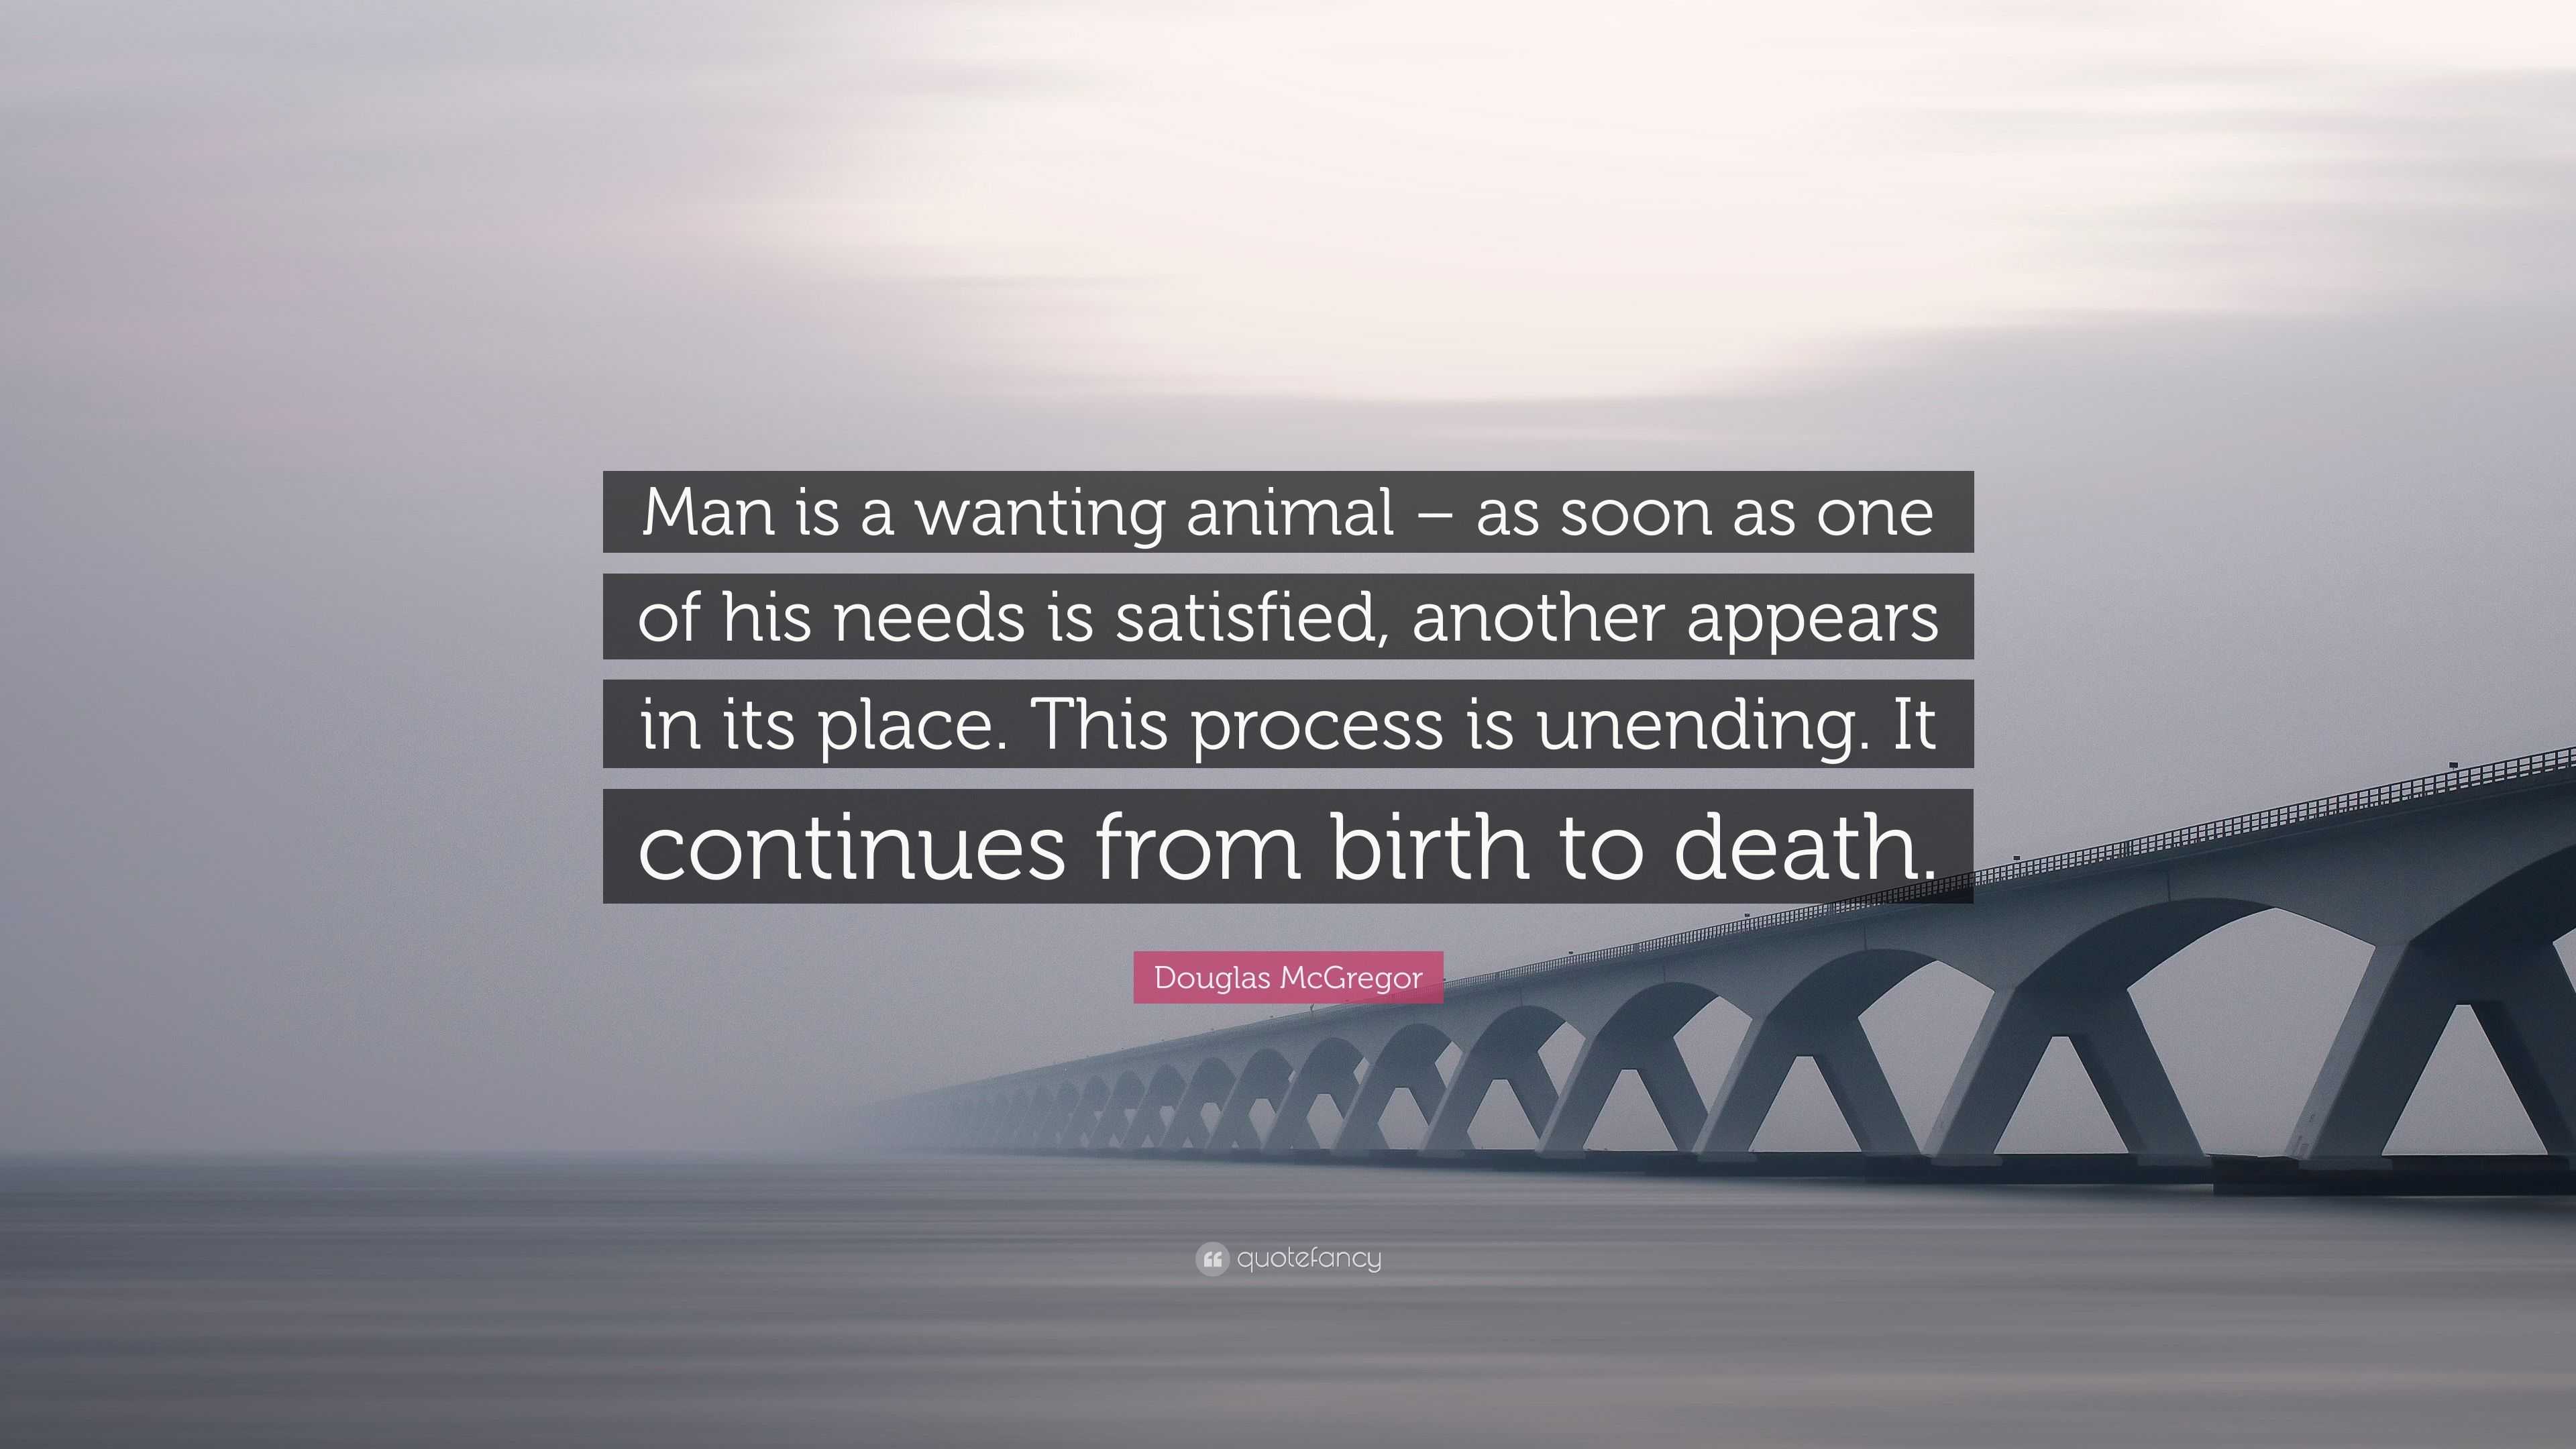 Douglas McGregor Quote: “Man is a wanting animal – as soon as one of